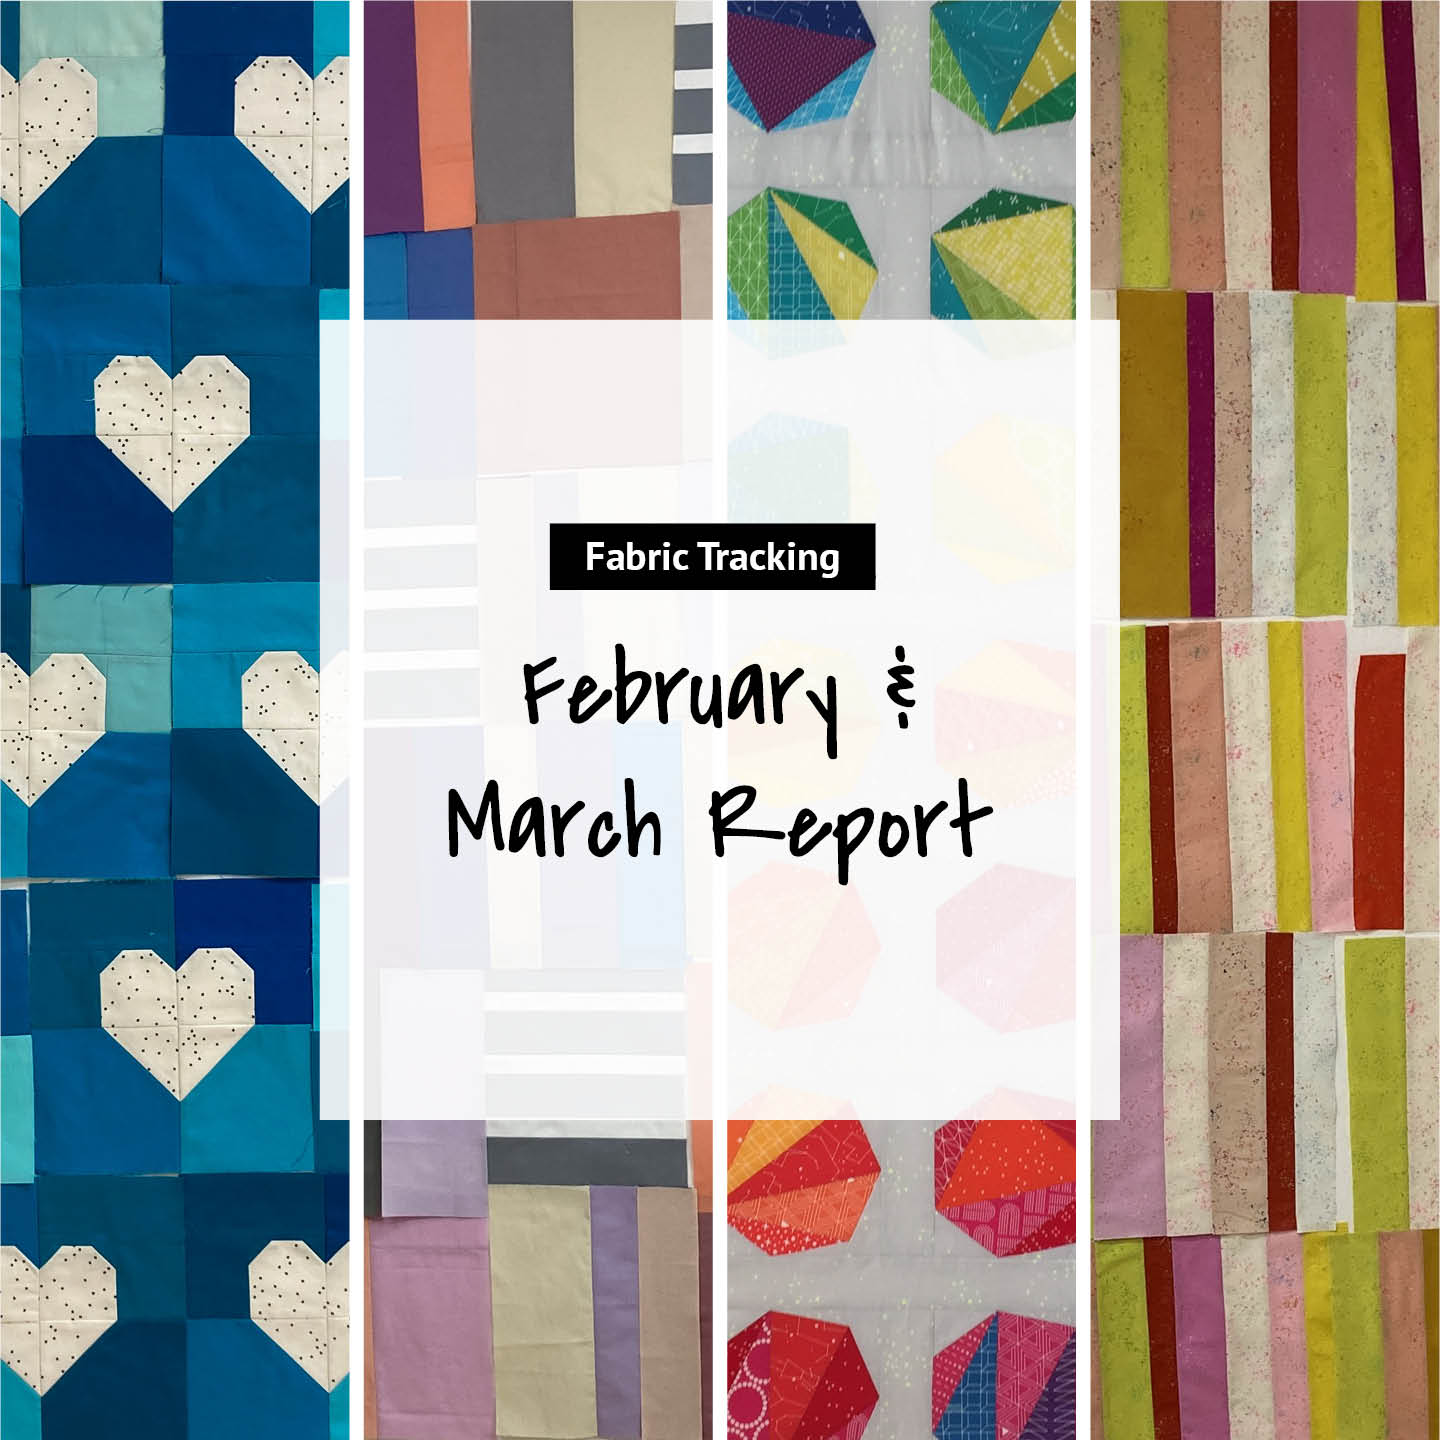 Fabric Tracking February & March